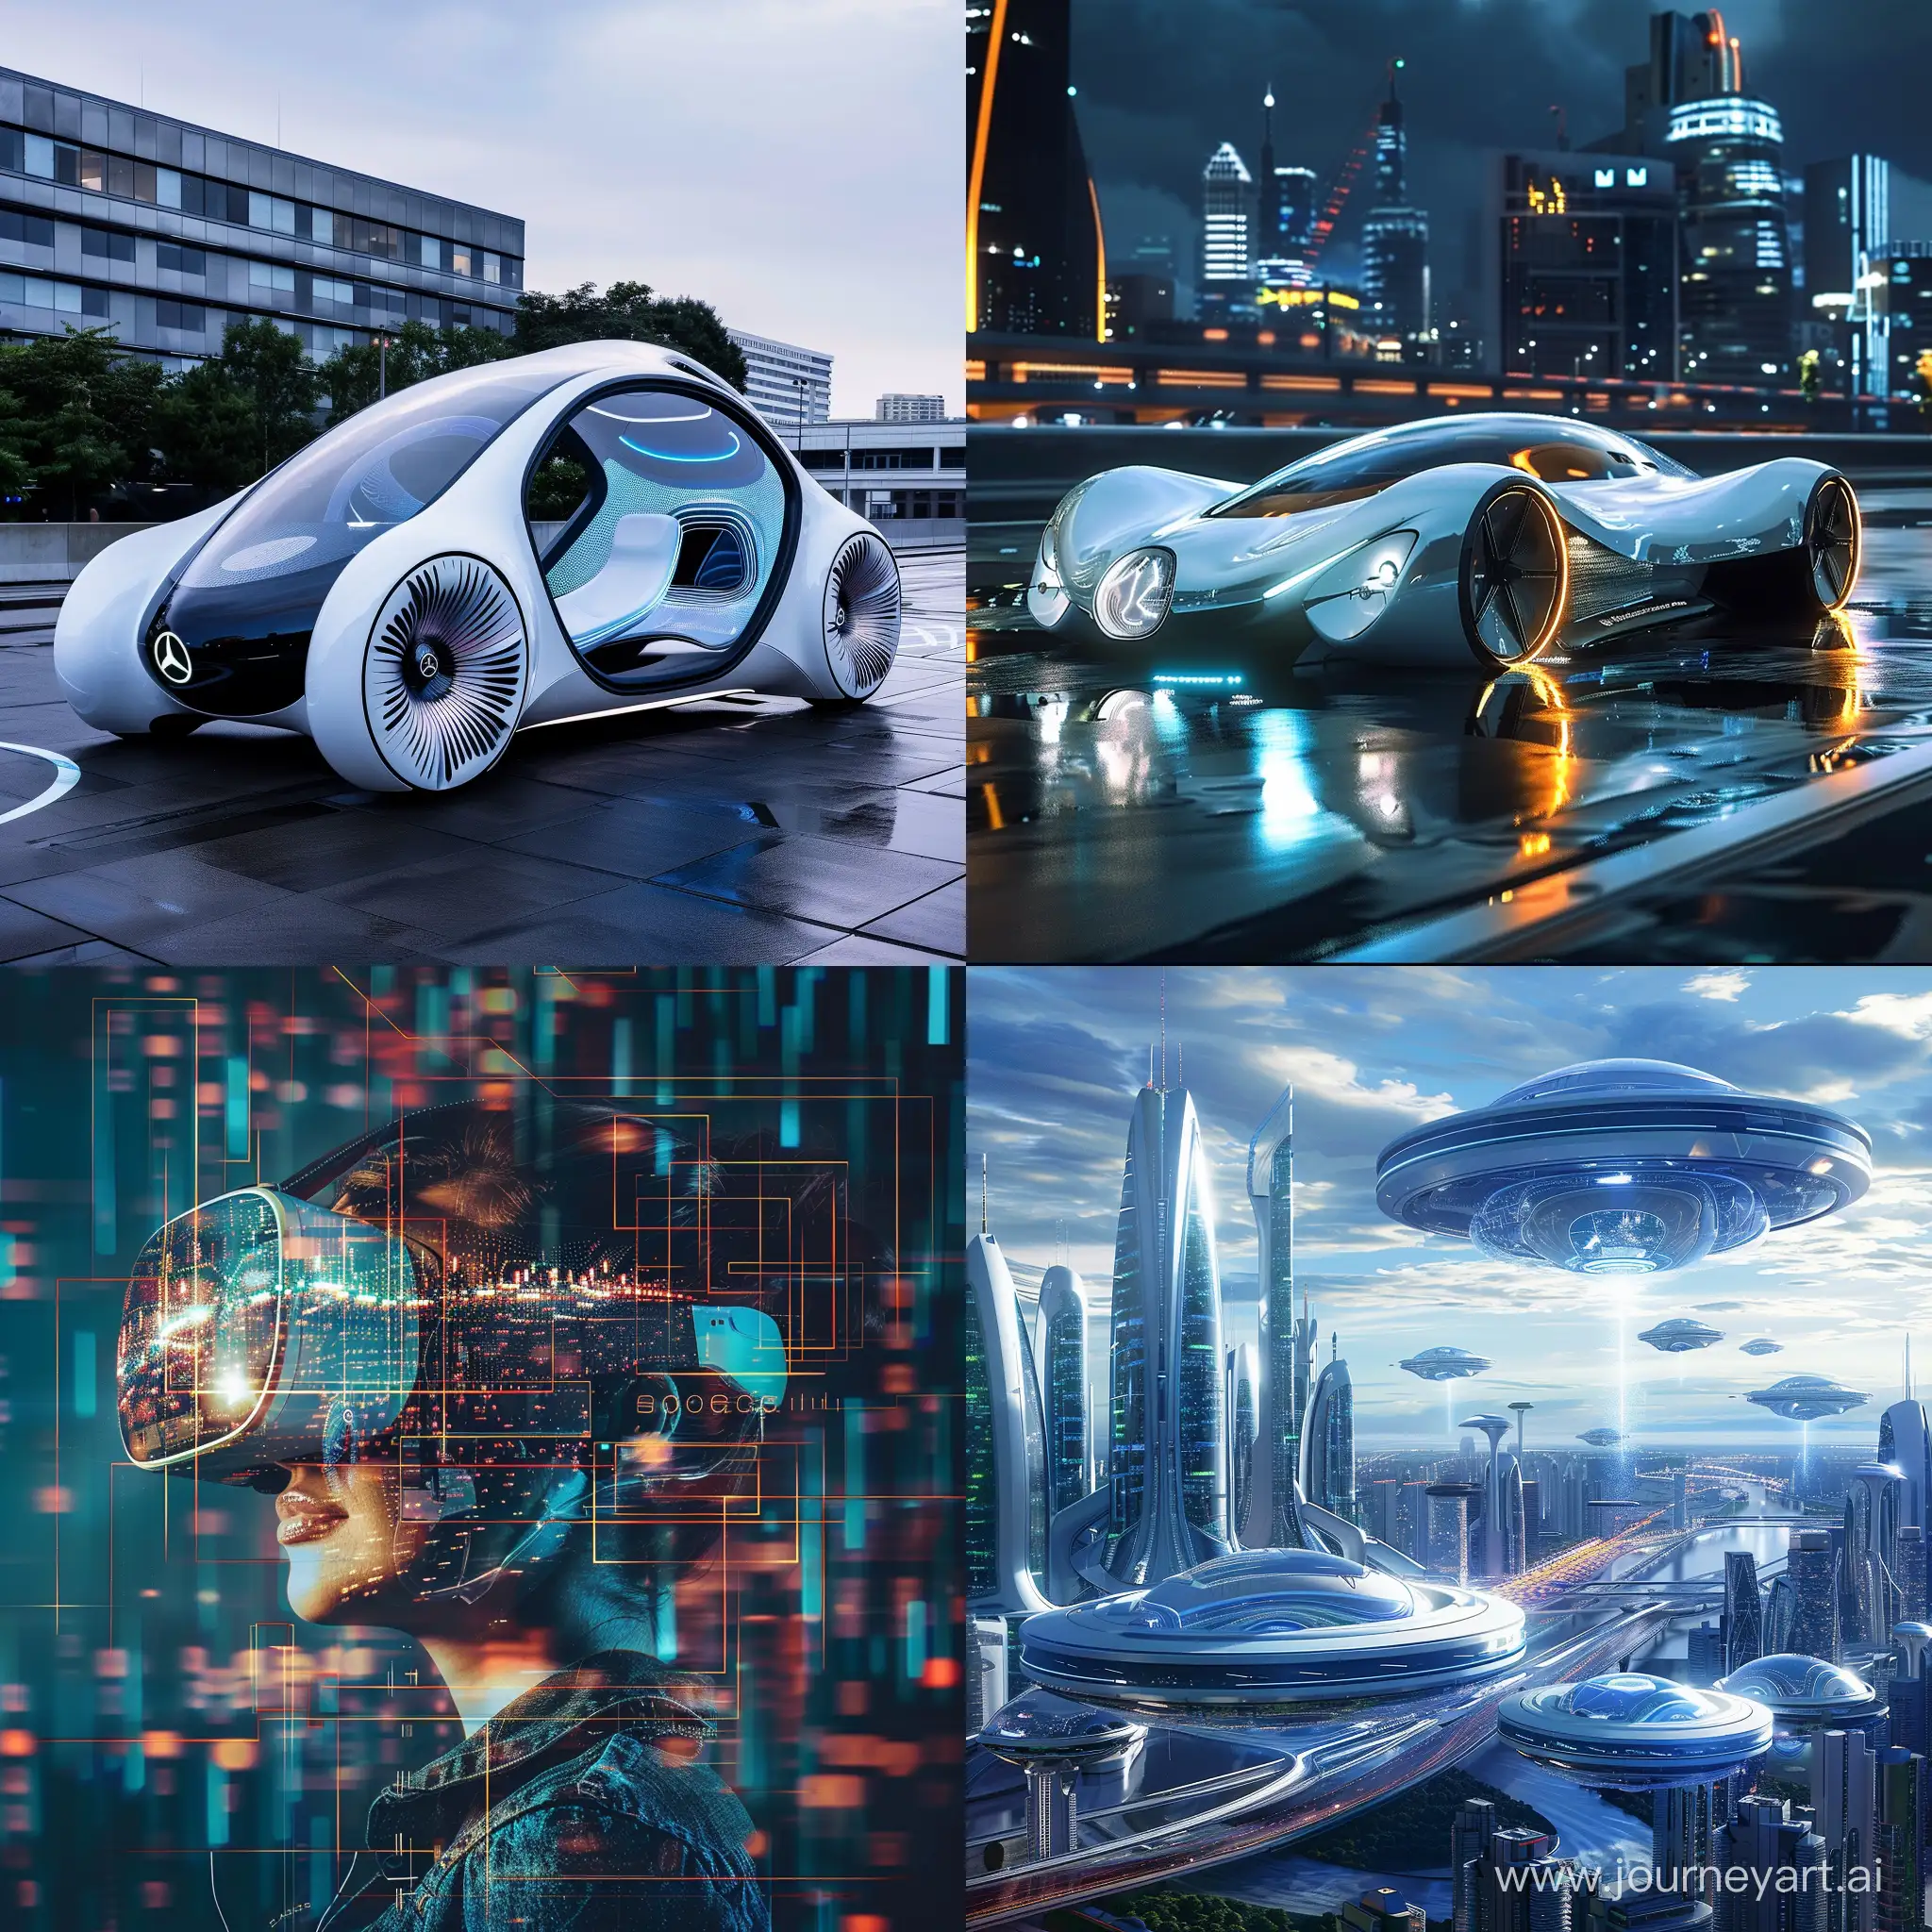 Futuristic-Innovations-Exploring-Style-and-Artistic-Vision